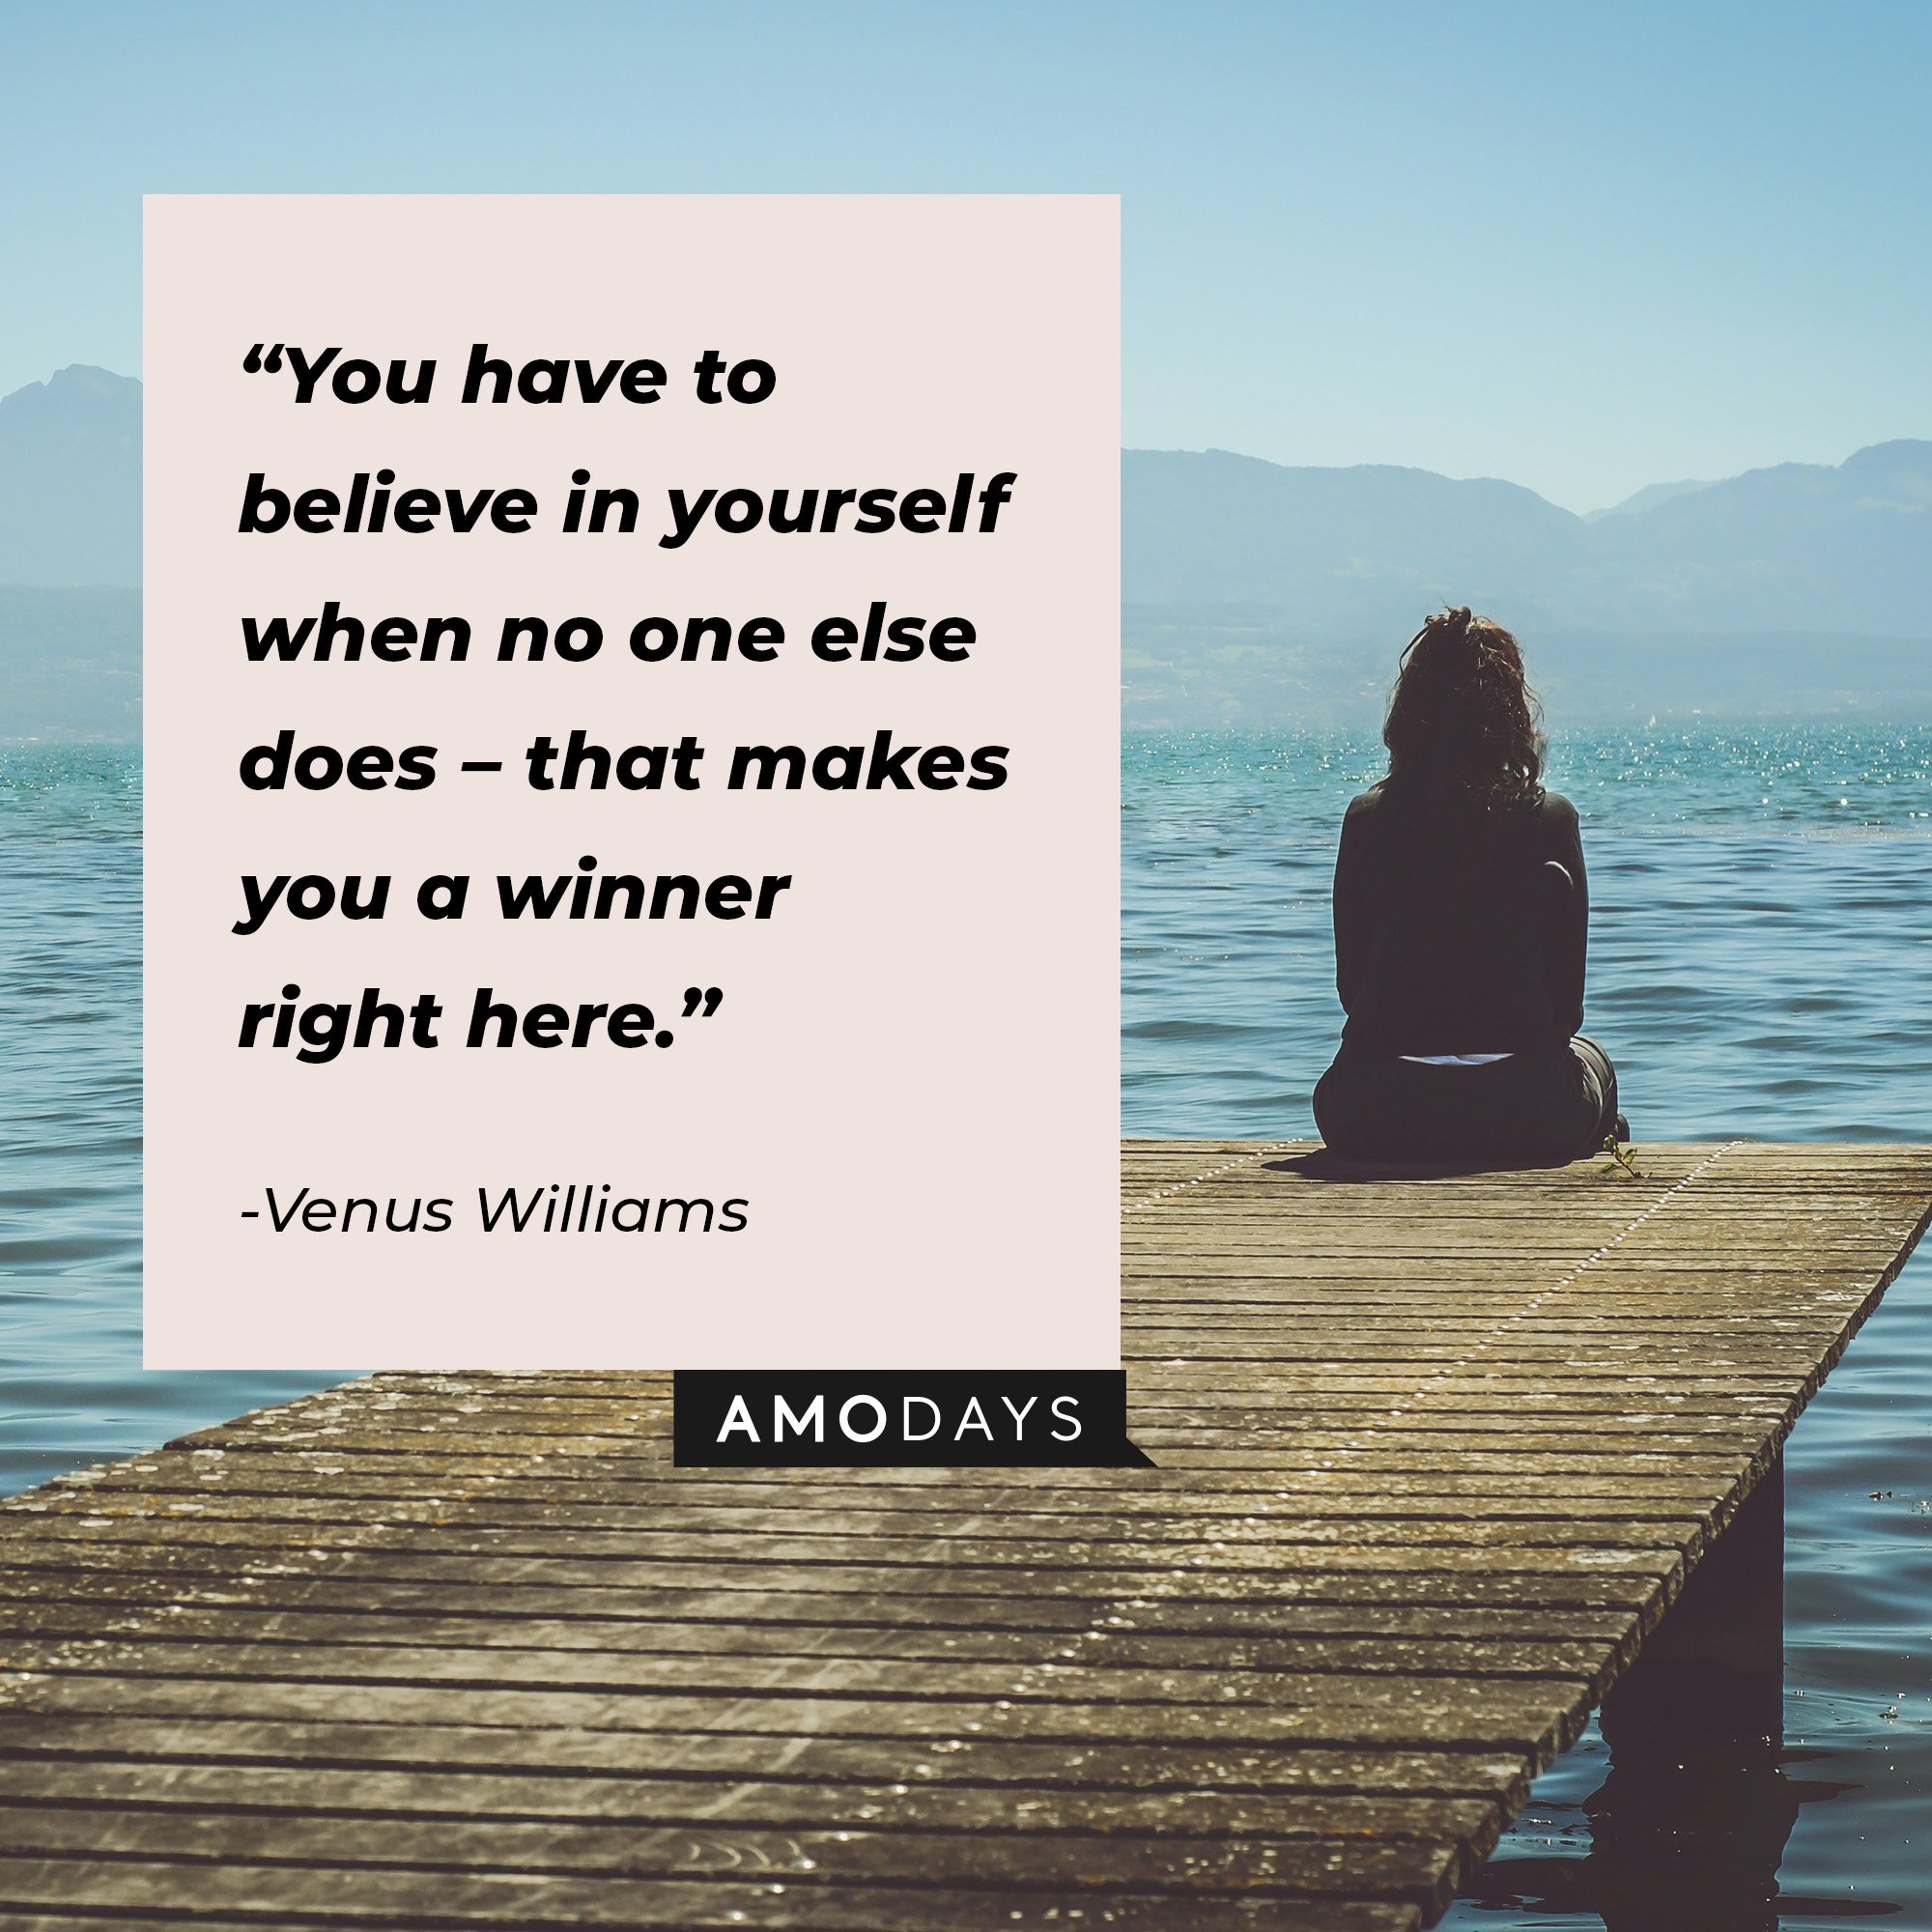 Venus Wiliams’ quote: “You have to believe in yourself when no one else does – that makes you a winner right here.” | Image: AmoDays  